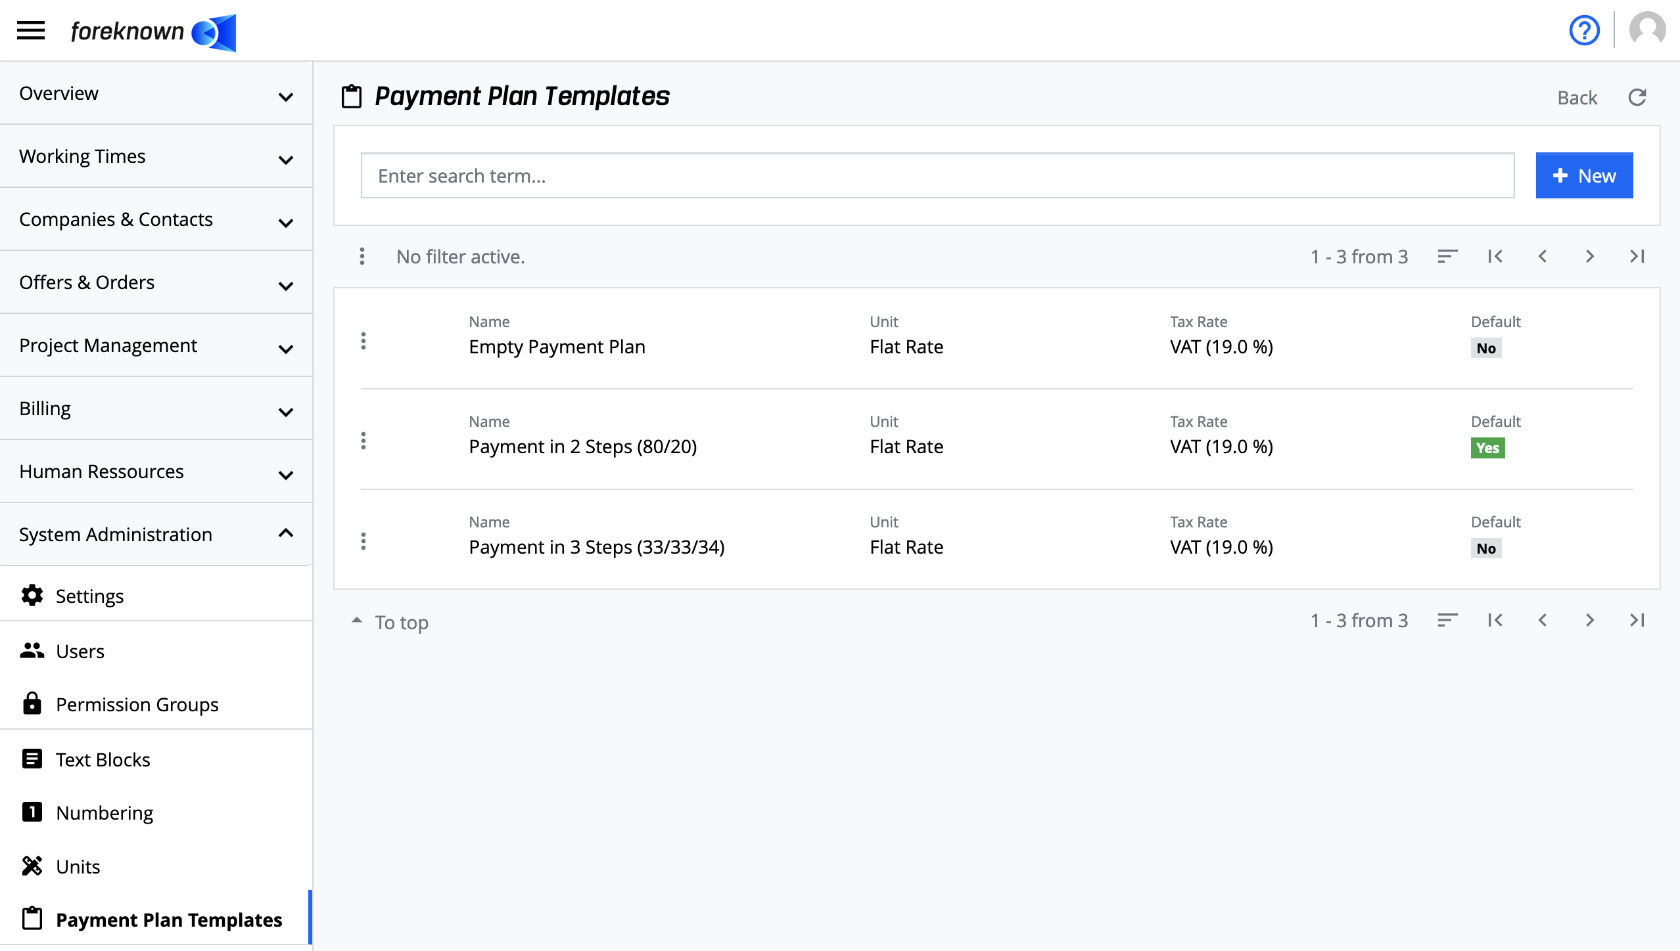 List of Payment Plan Templates